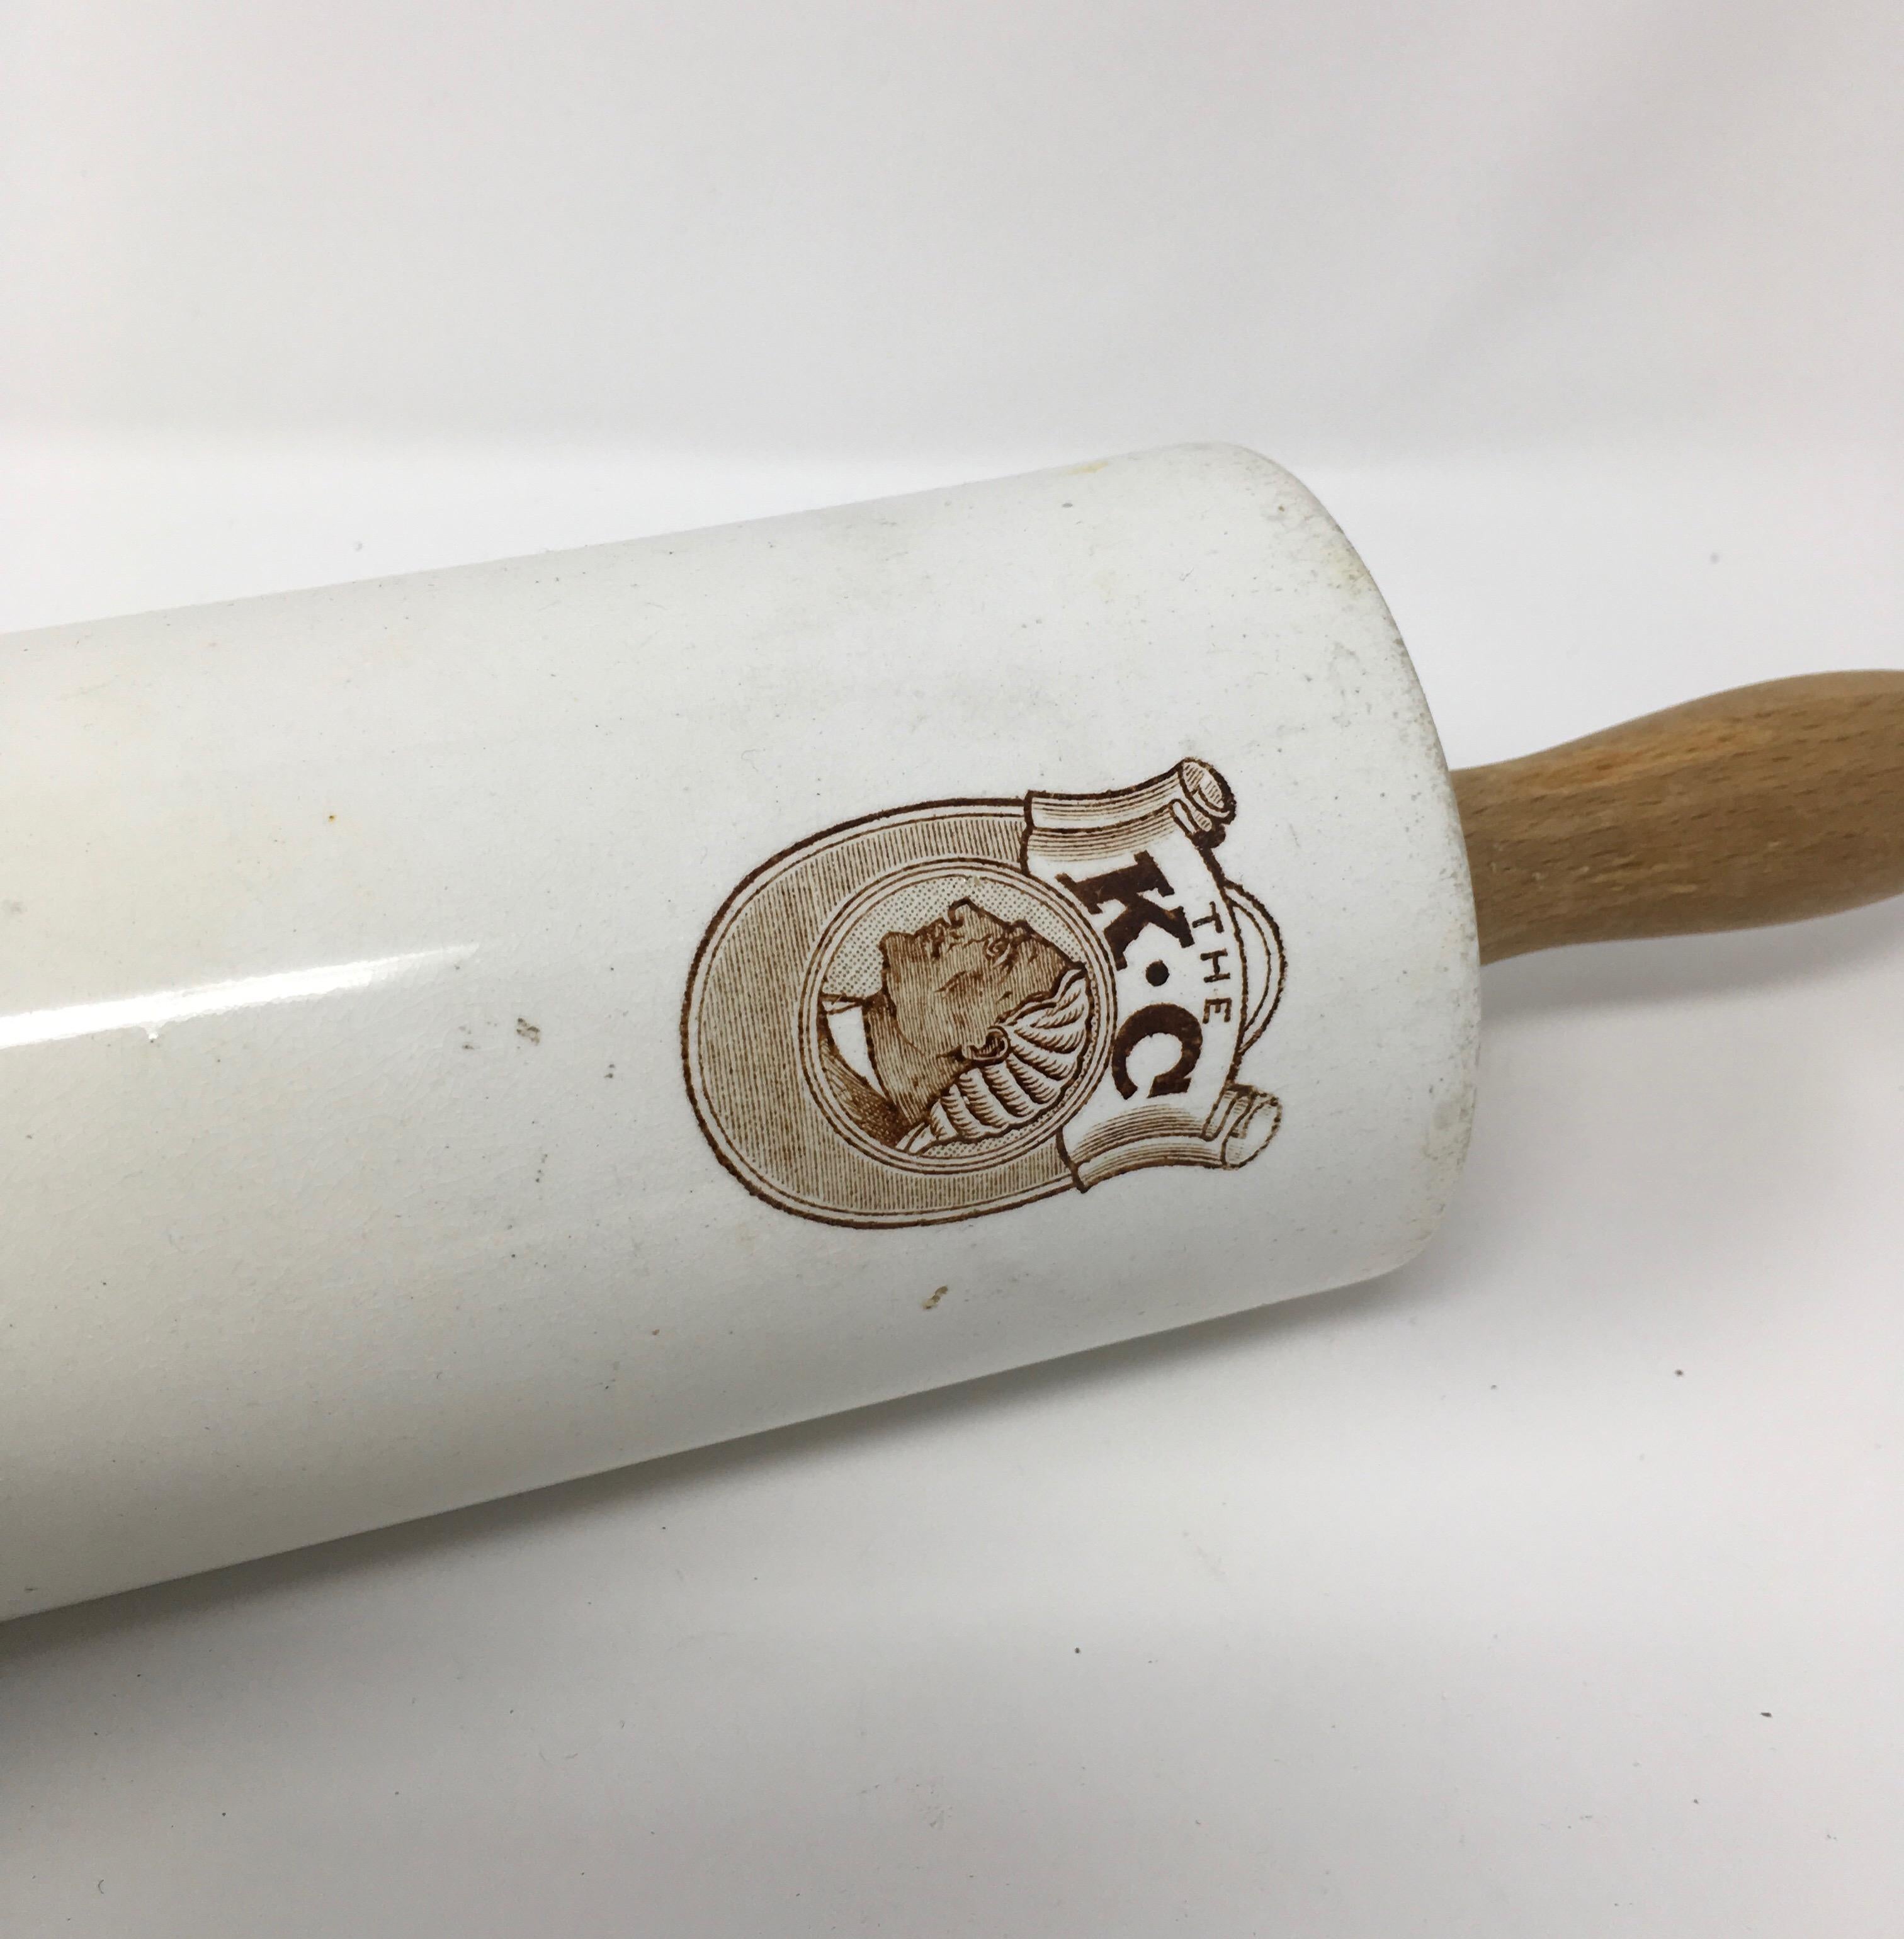 This is a rare English advertising ironstone rolling pin. The brown transfer depicts an emblem of a man and the lettering THE K C. Advertising rolling pins were made of ironstone and wood and this one is probably form the late 1800s. This rolling